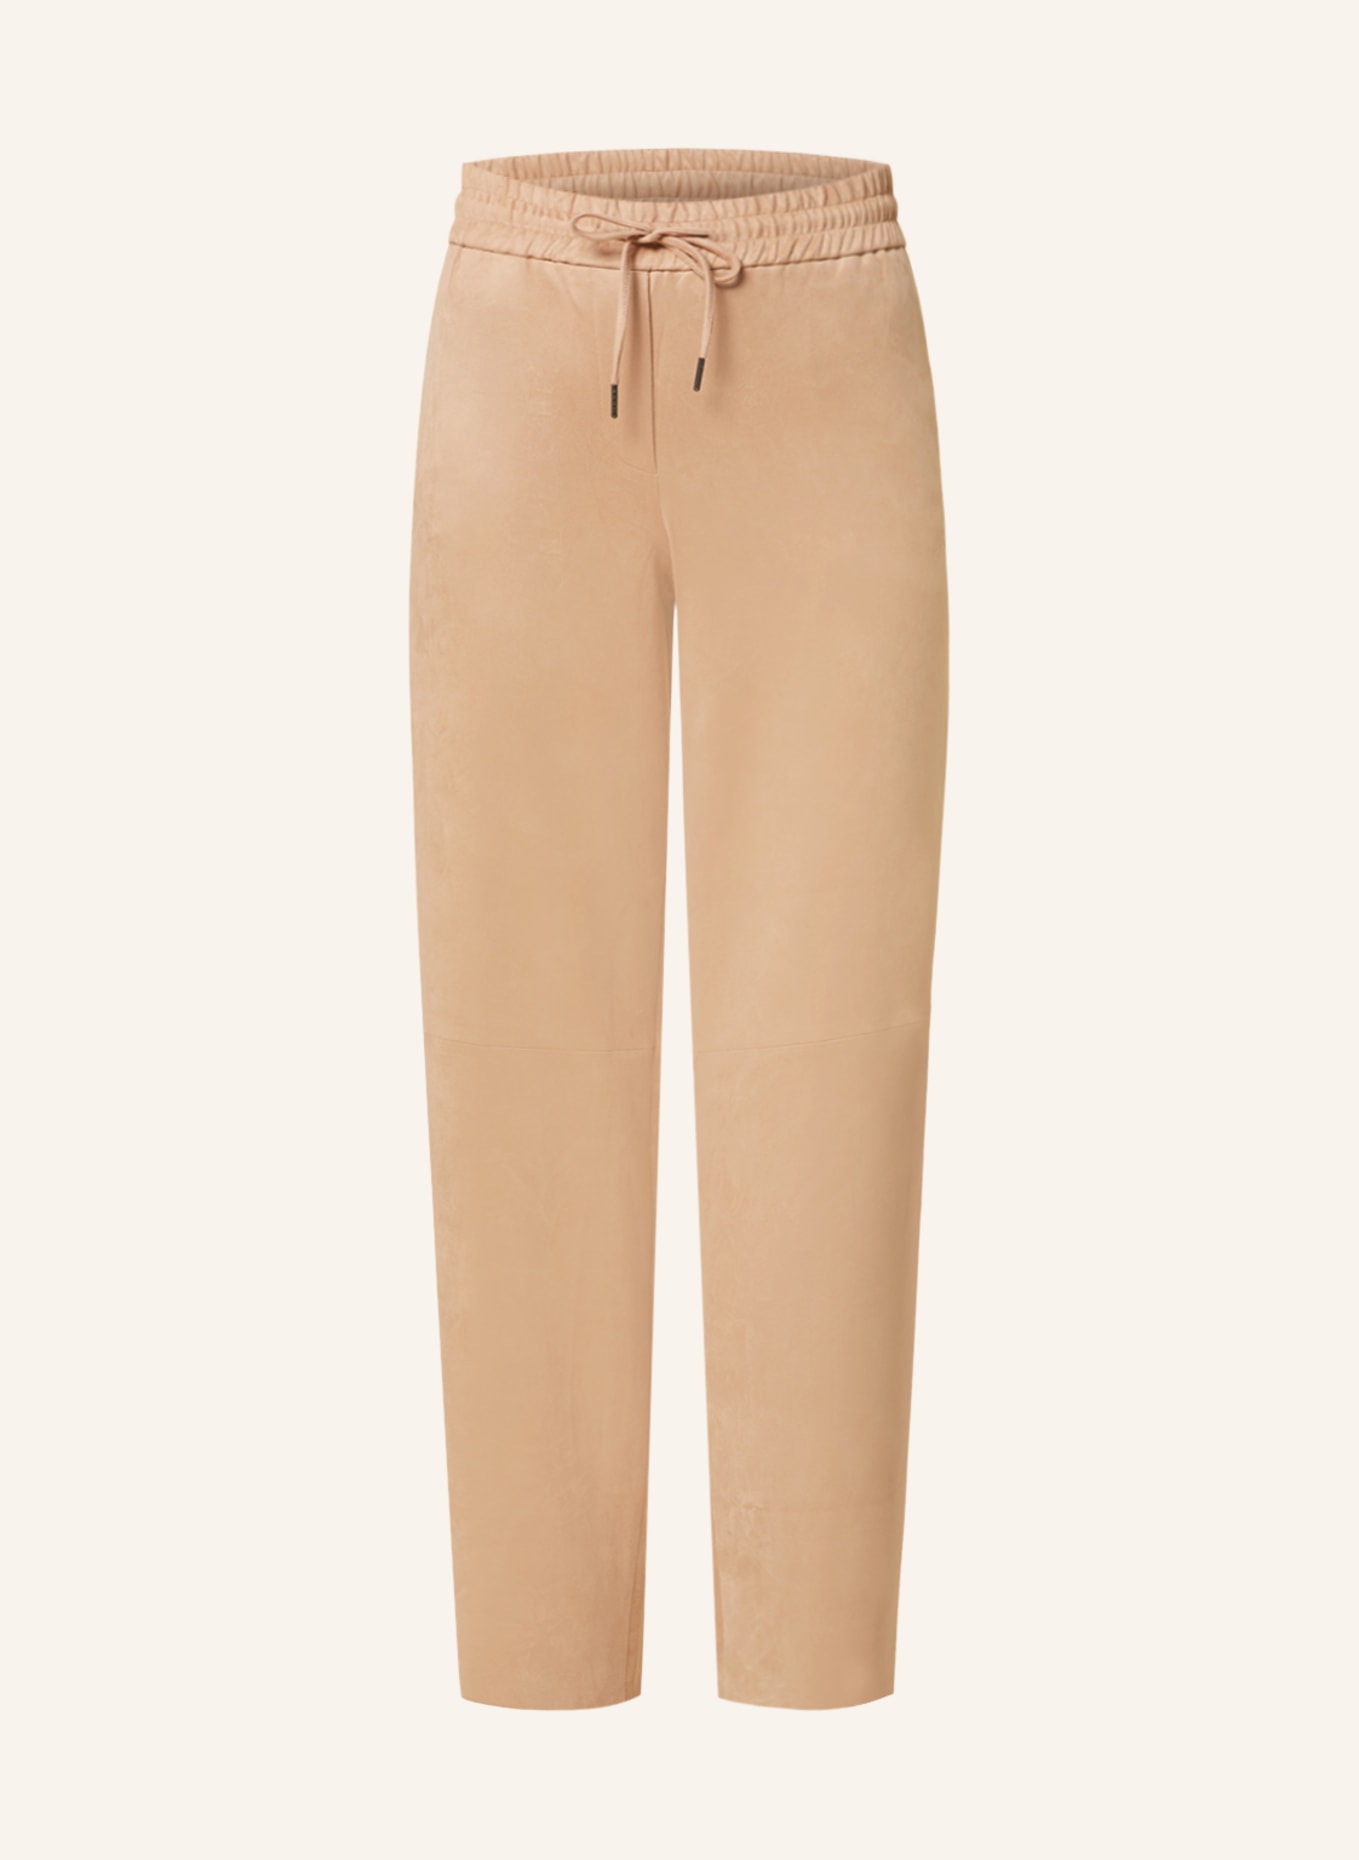 Juvia Trousers AVA in jogger style in leather look, Color: CAMEL (Image 1)